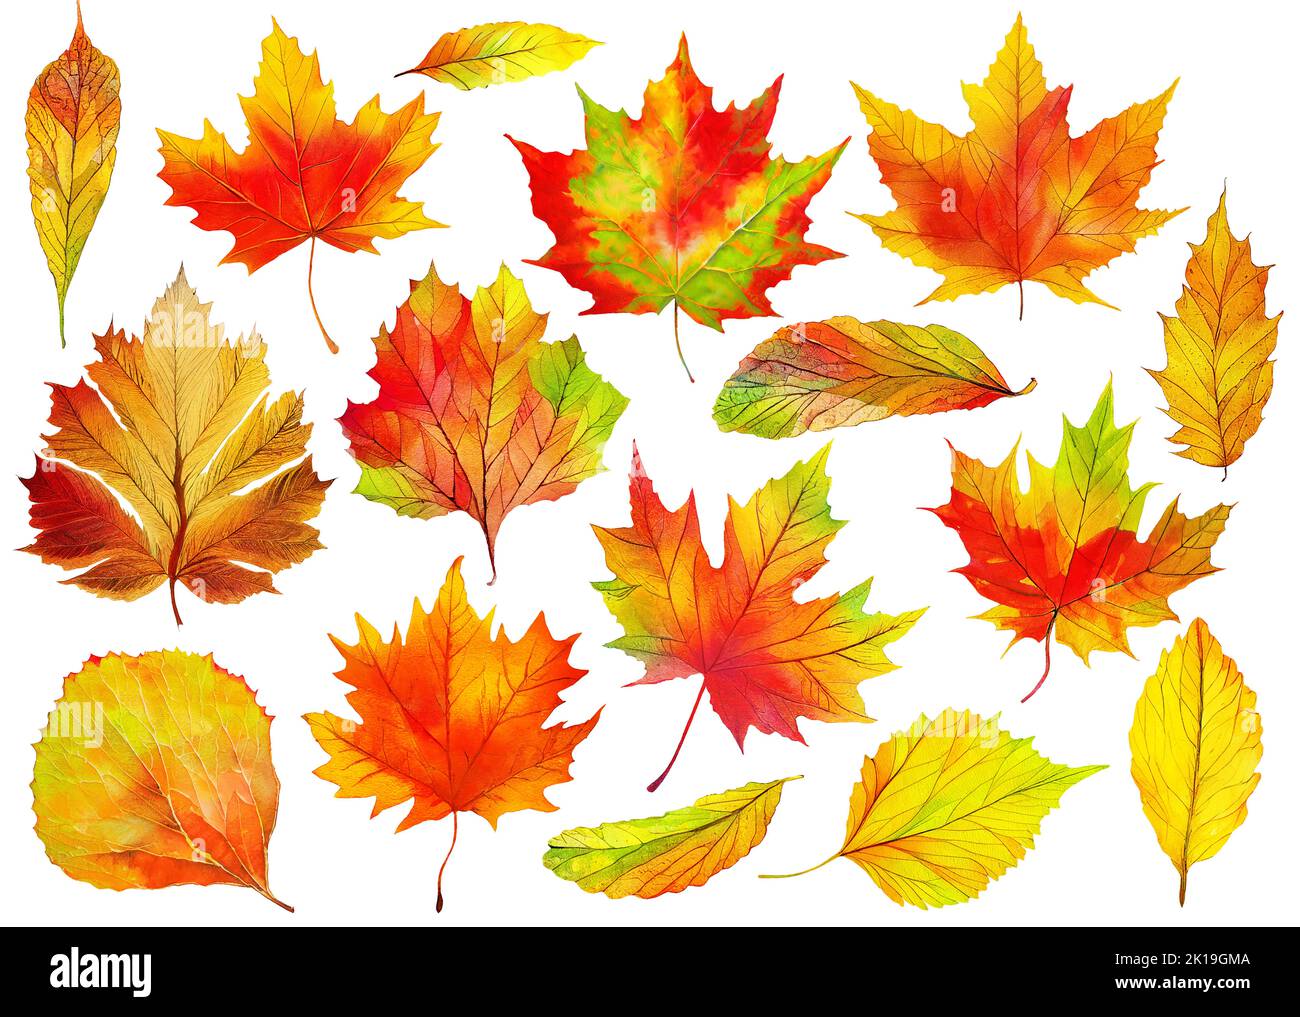 16 multicolored autumn leaves of trees and shrubs isolated on white background. Digital illustration based on render by neural network Stock Photo